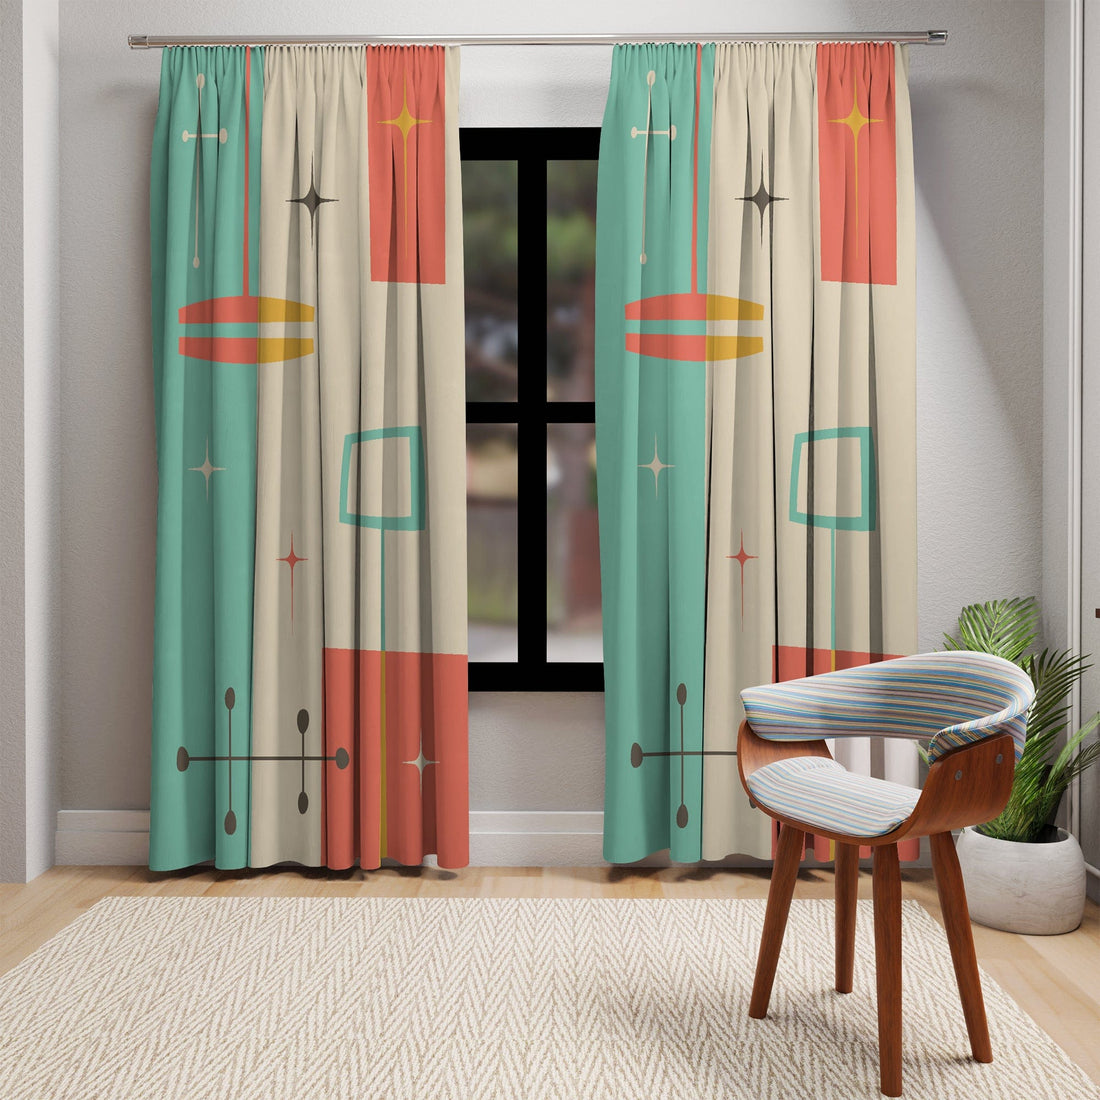 Kate McEnroe New York Double Panel Window Curtains in Mid Century Modern Geometric Abstract PrintWindow CurtainsCurtainSheer - 50x84 - DoublePanel - 20220823181102249